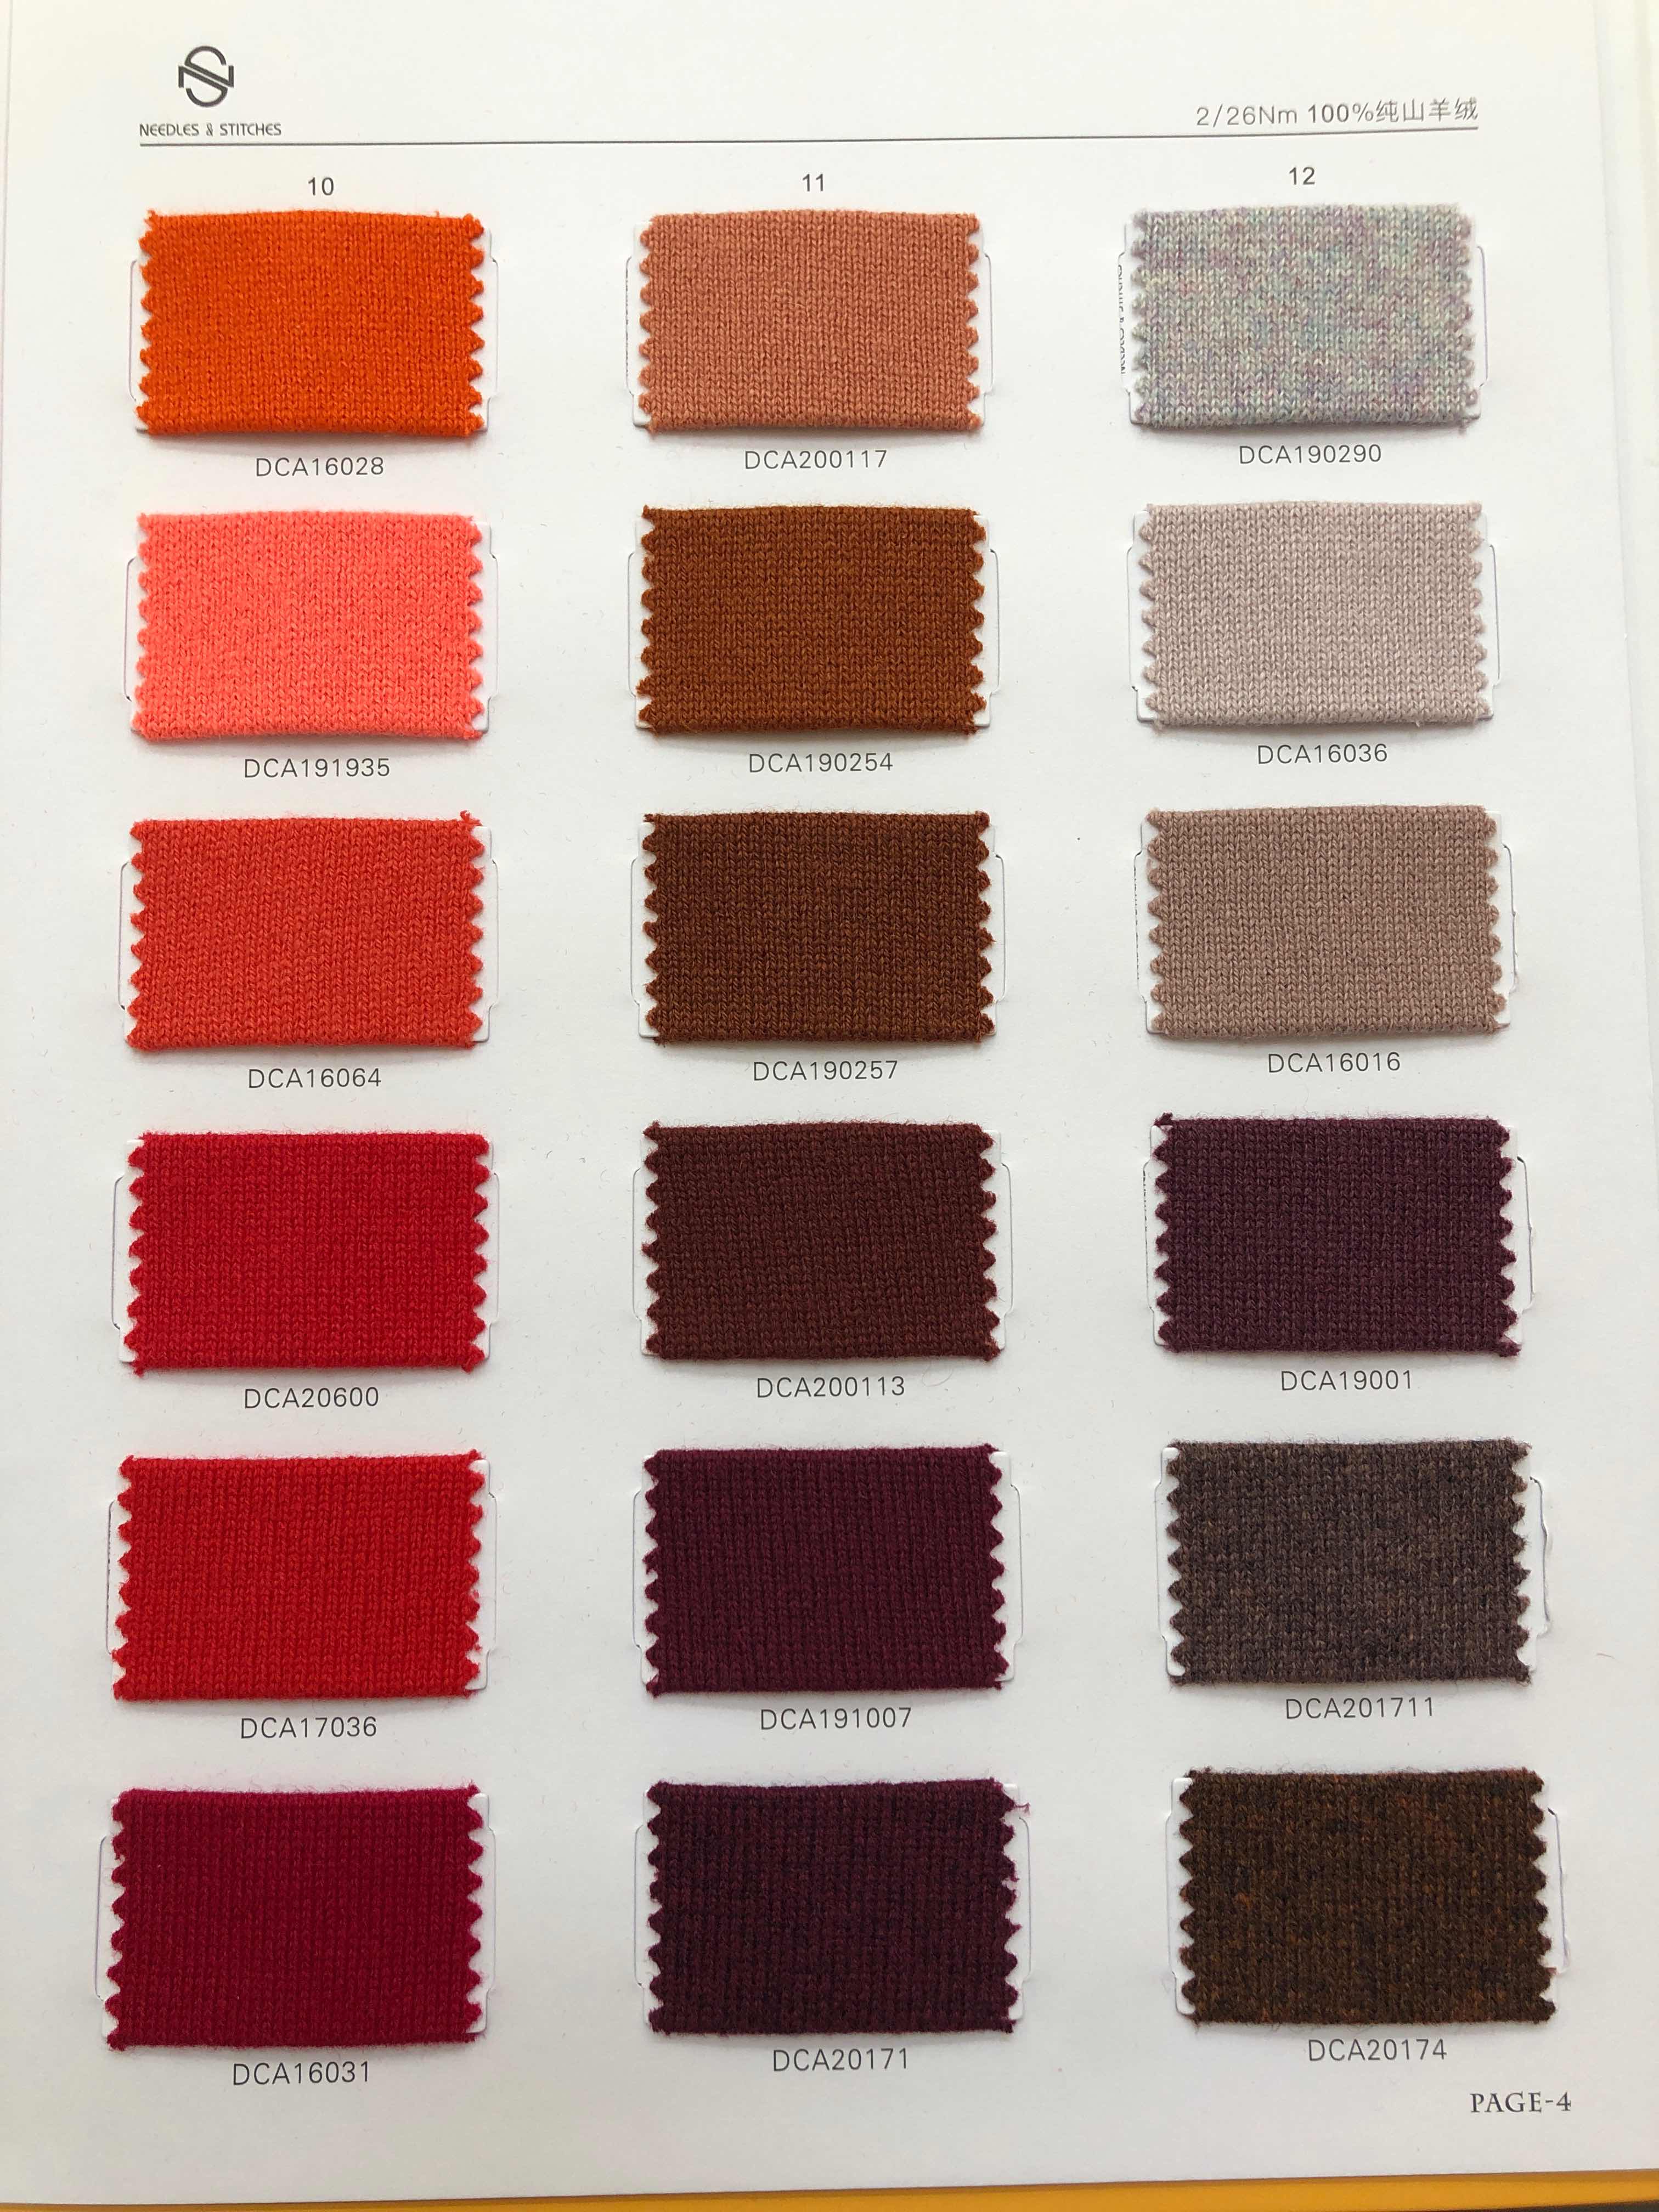 2/26 100%CASHMERE COLOR CARDS more than 180 colors page 4~7